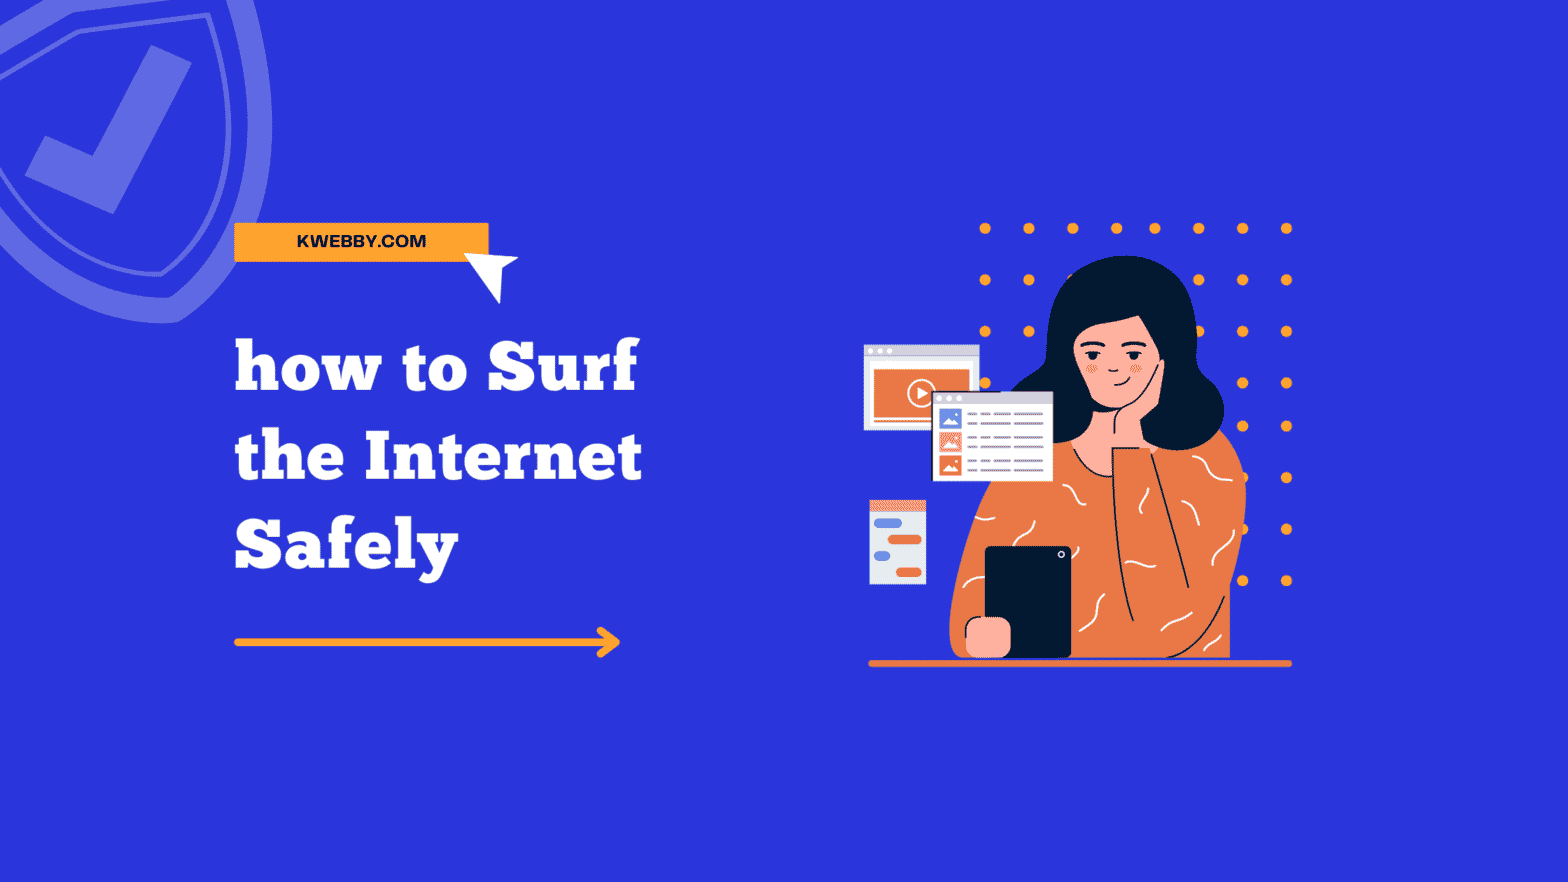 how to Surf the Internet Safely